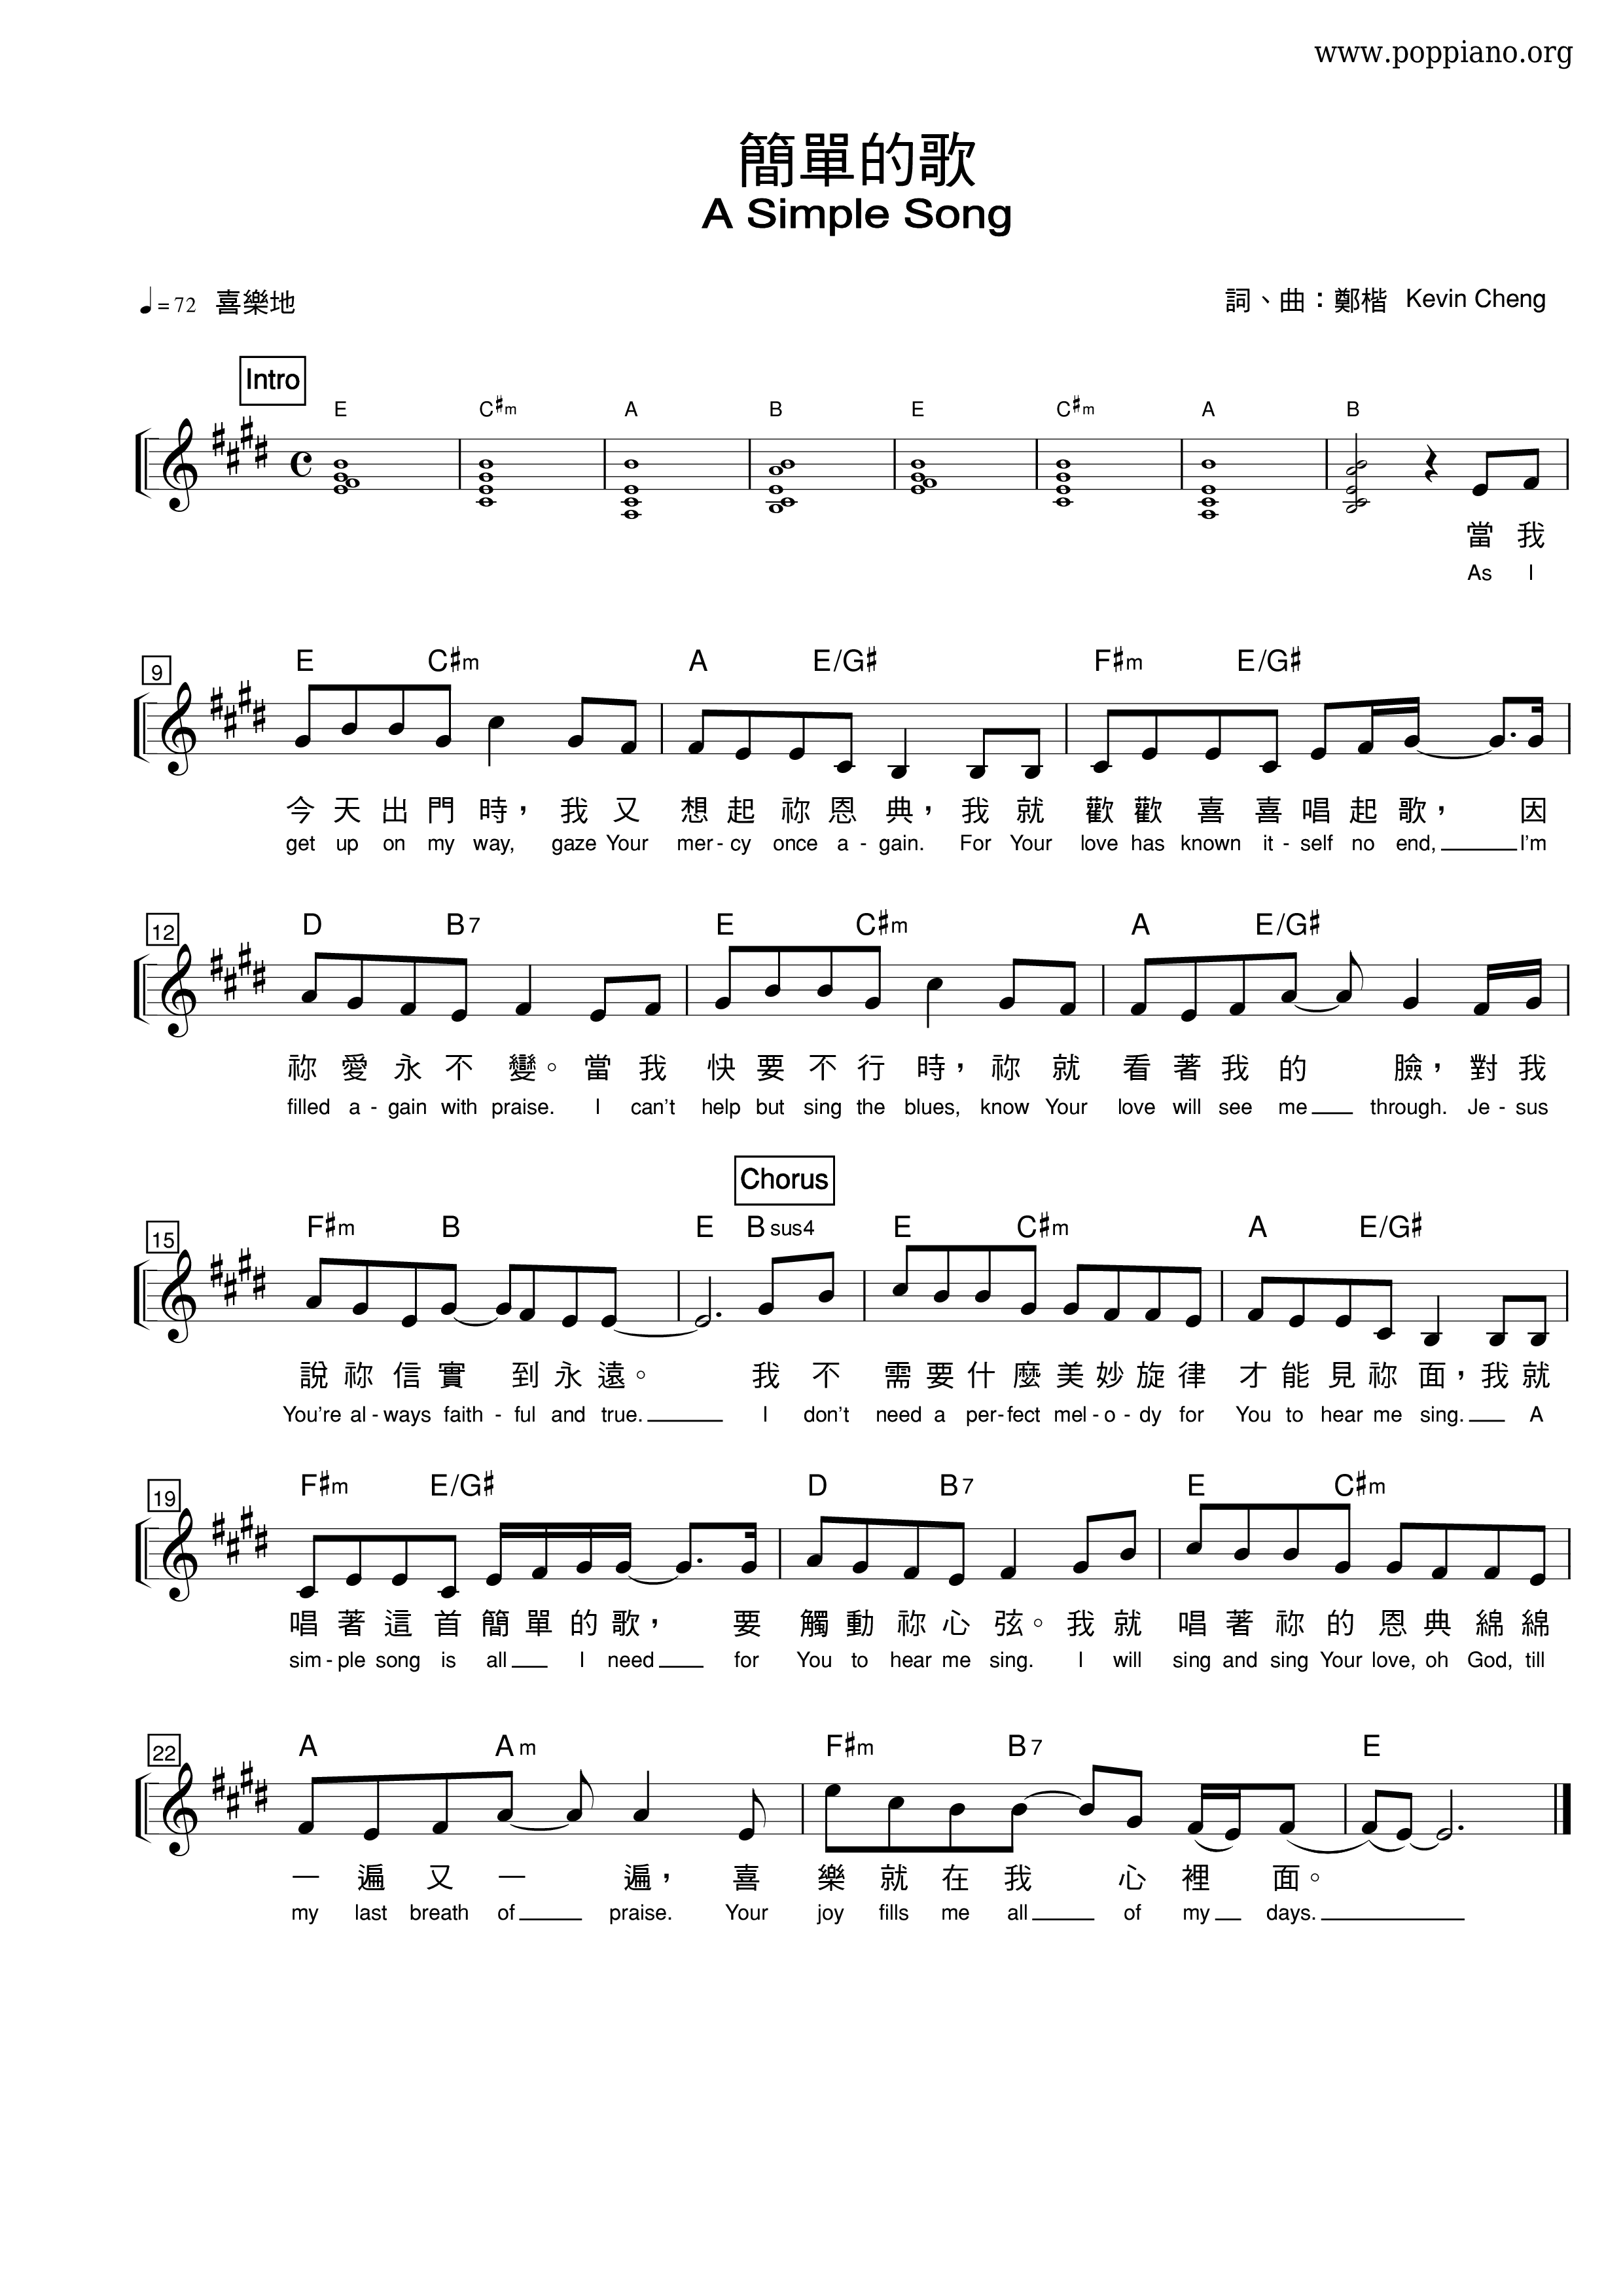 Simple Song Score